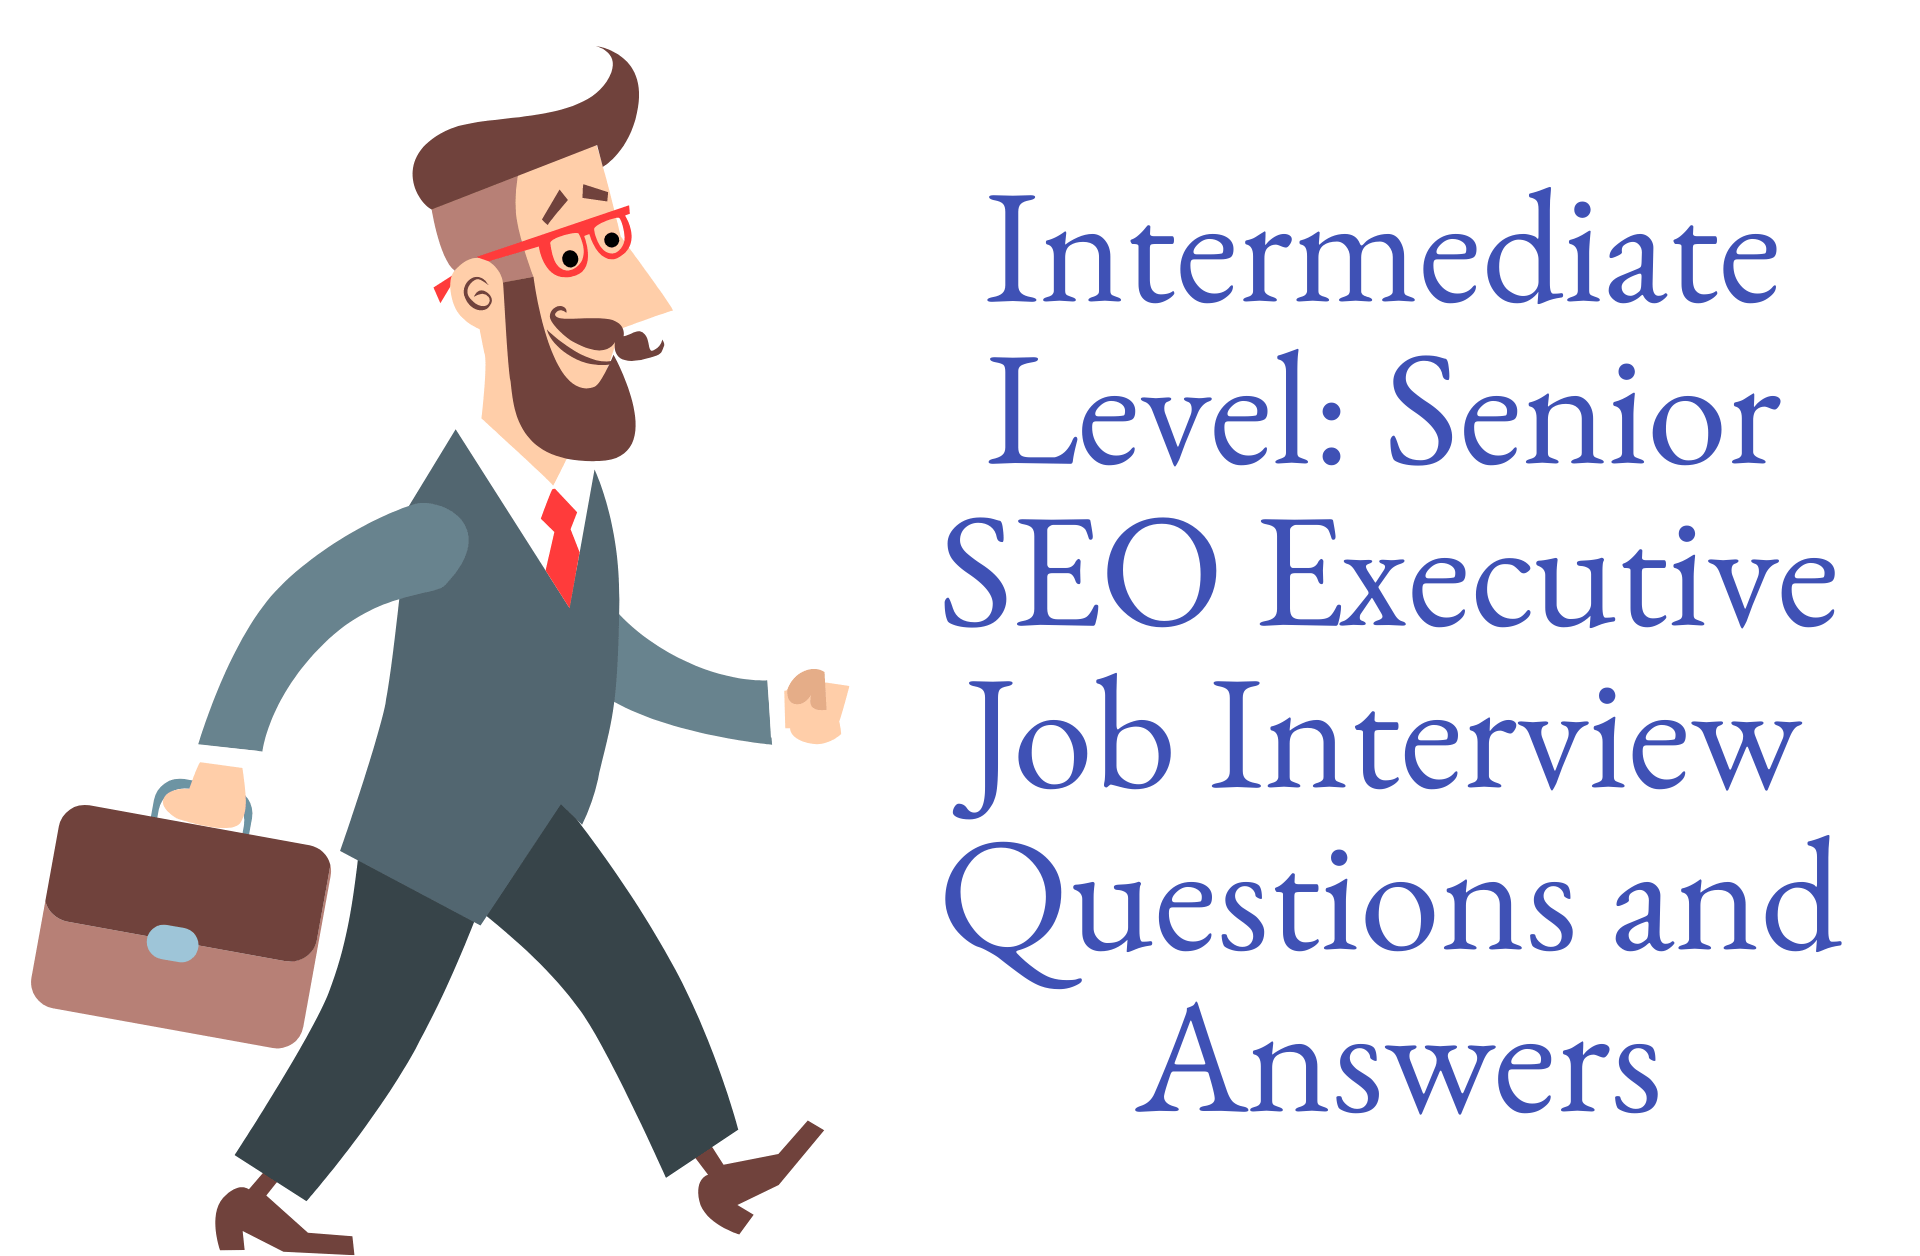 You are currently viewing Intermediate Level: Senior SEO Executive Job Interview Questions and Answers